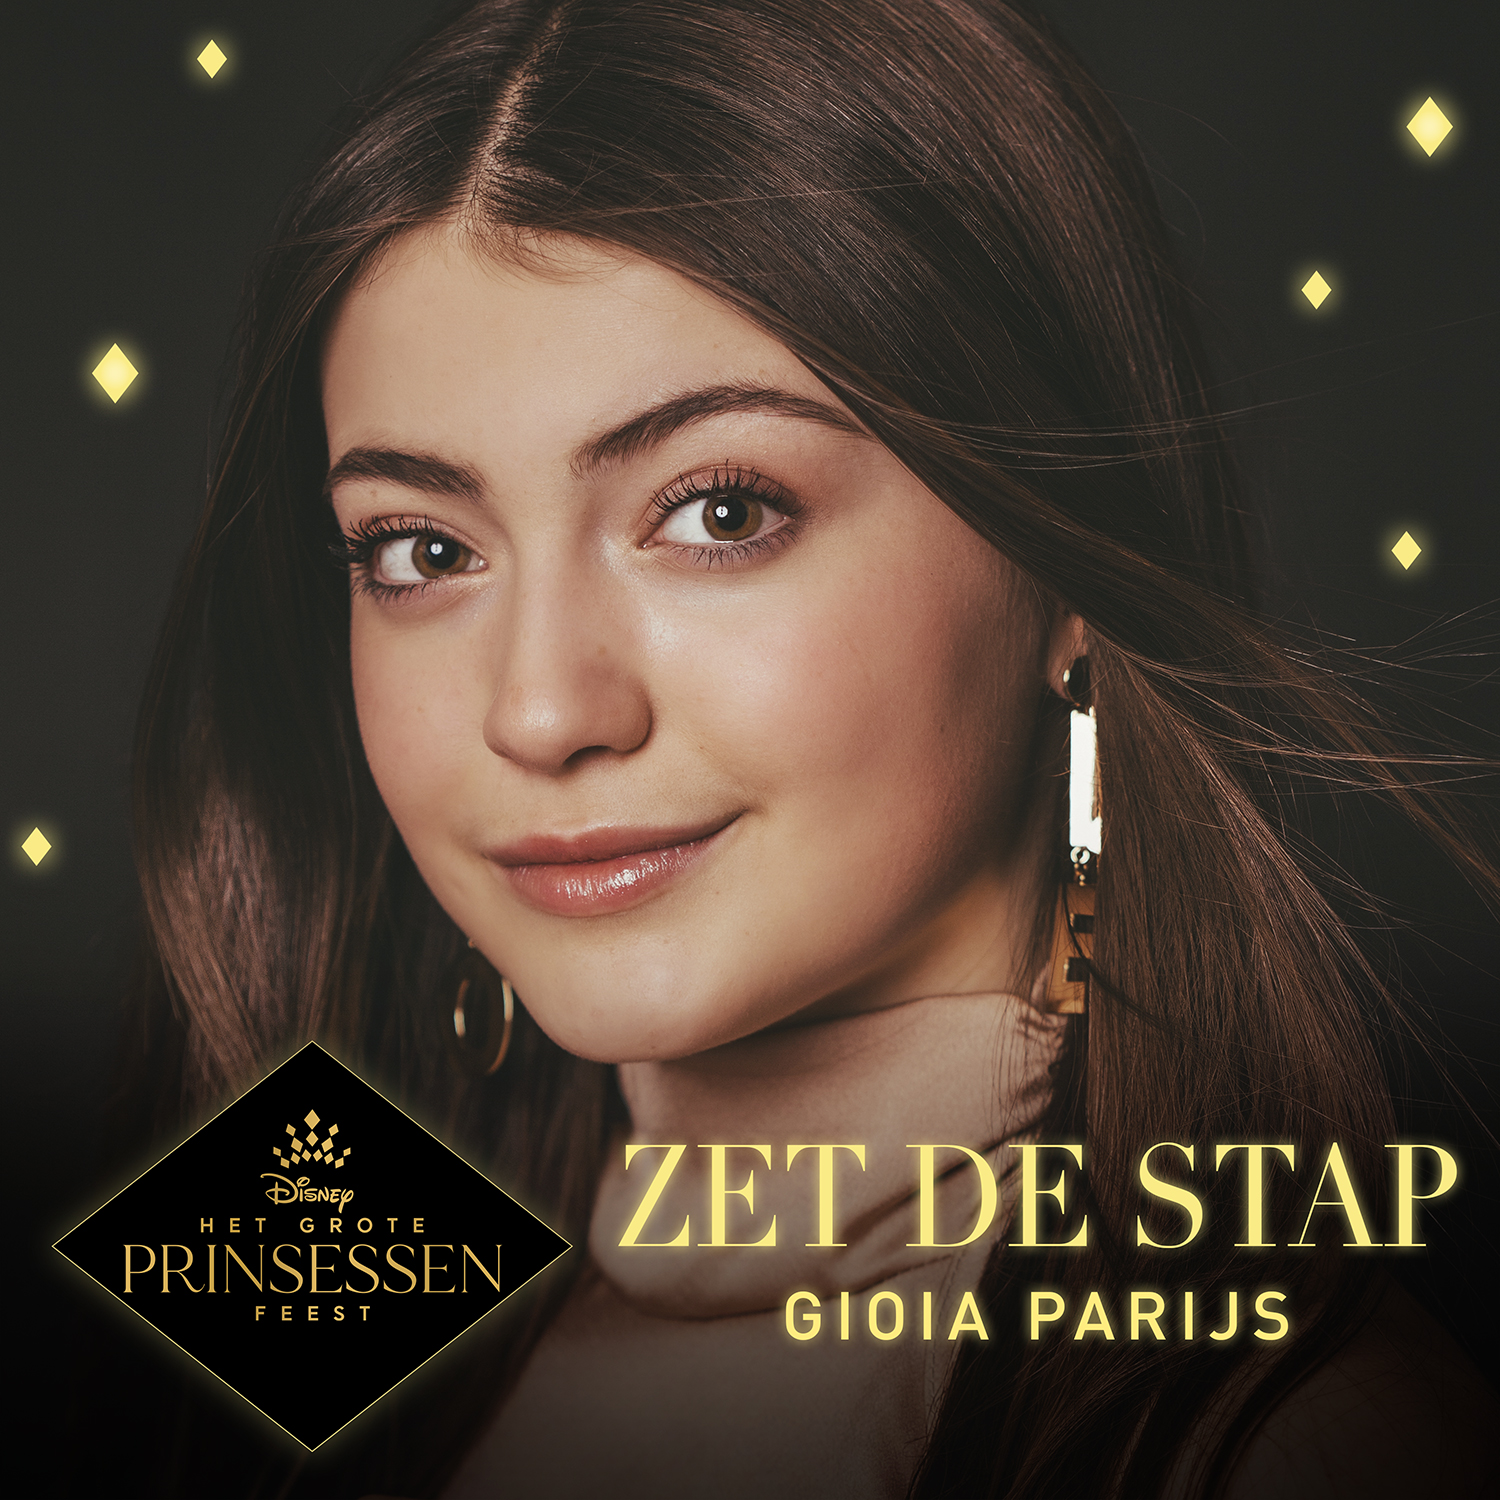 Disney and Gioia Paris released a new song "Zet de Stap" in honor of Disney princesses